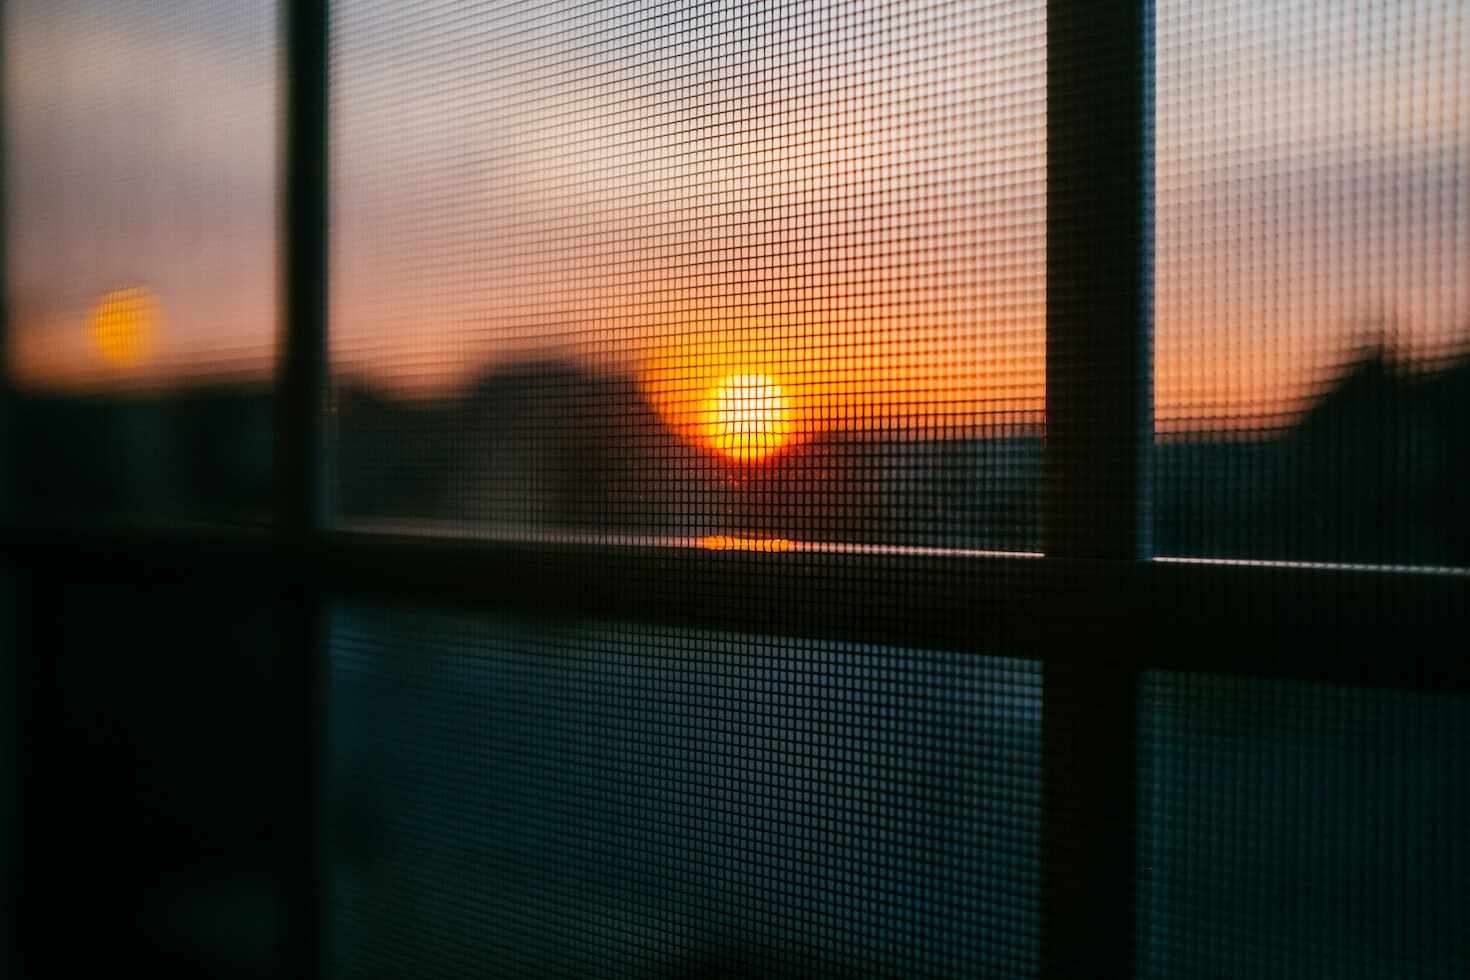 View of the sunset through a window screen